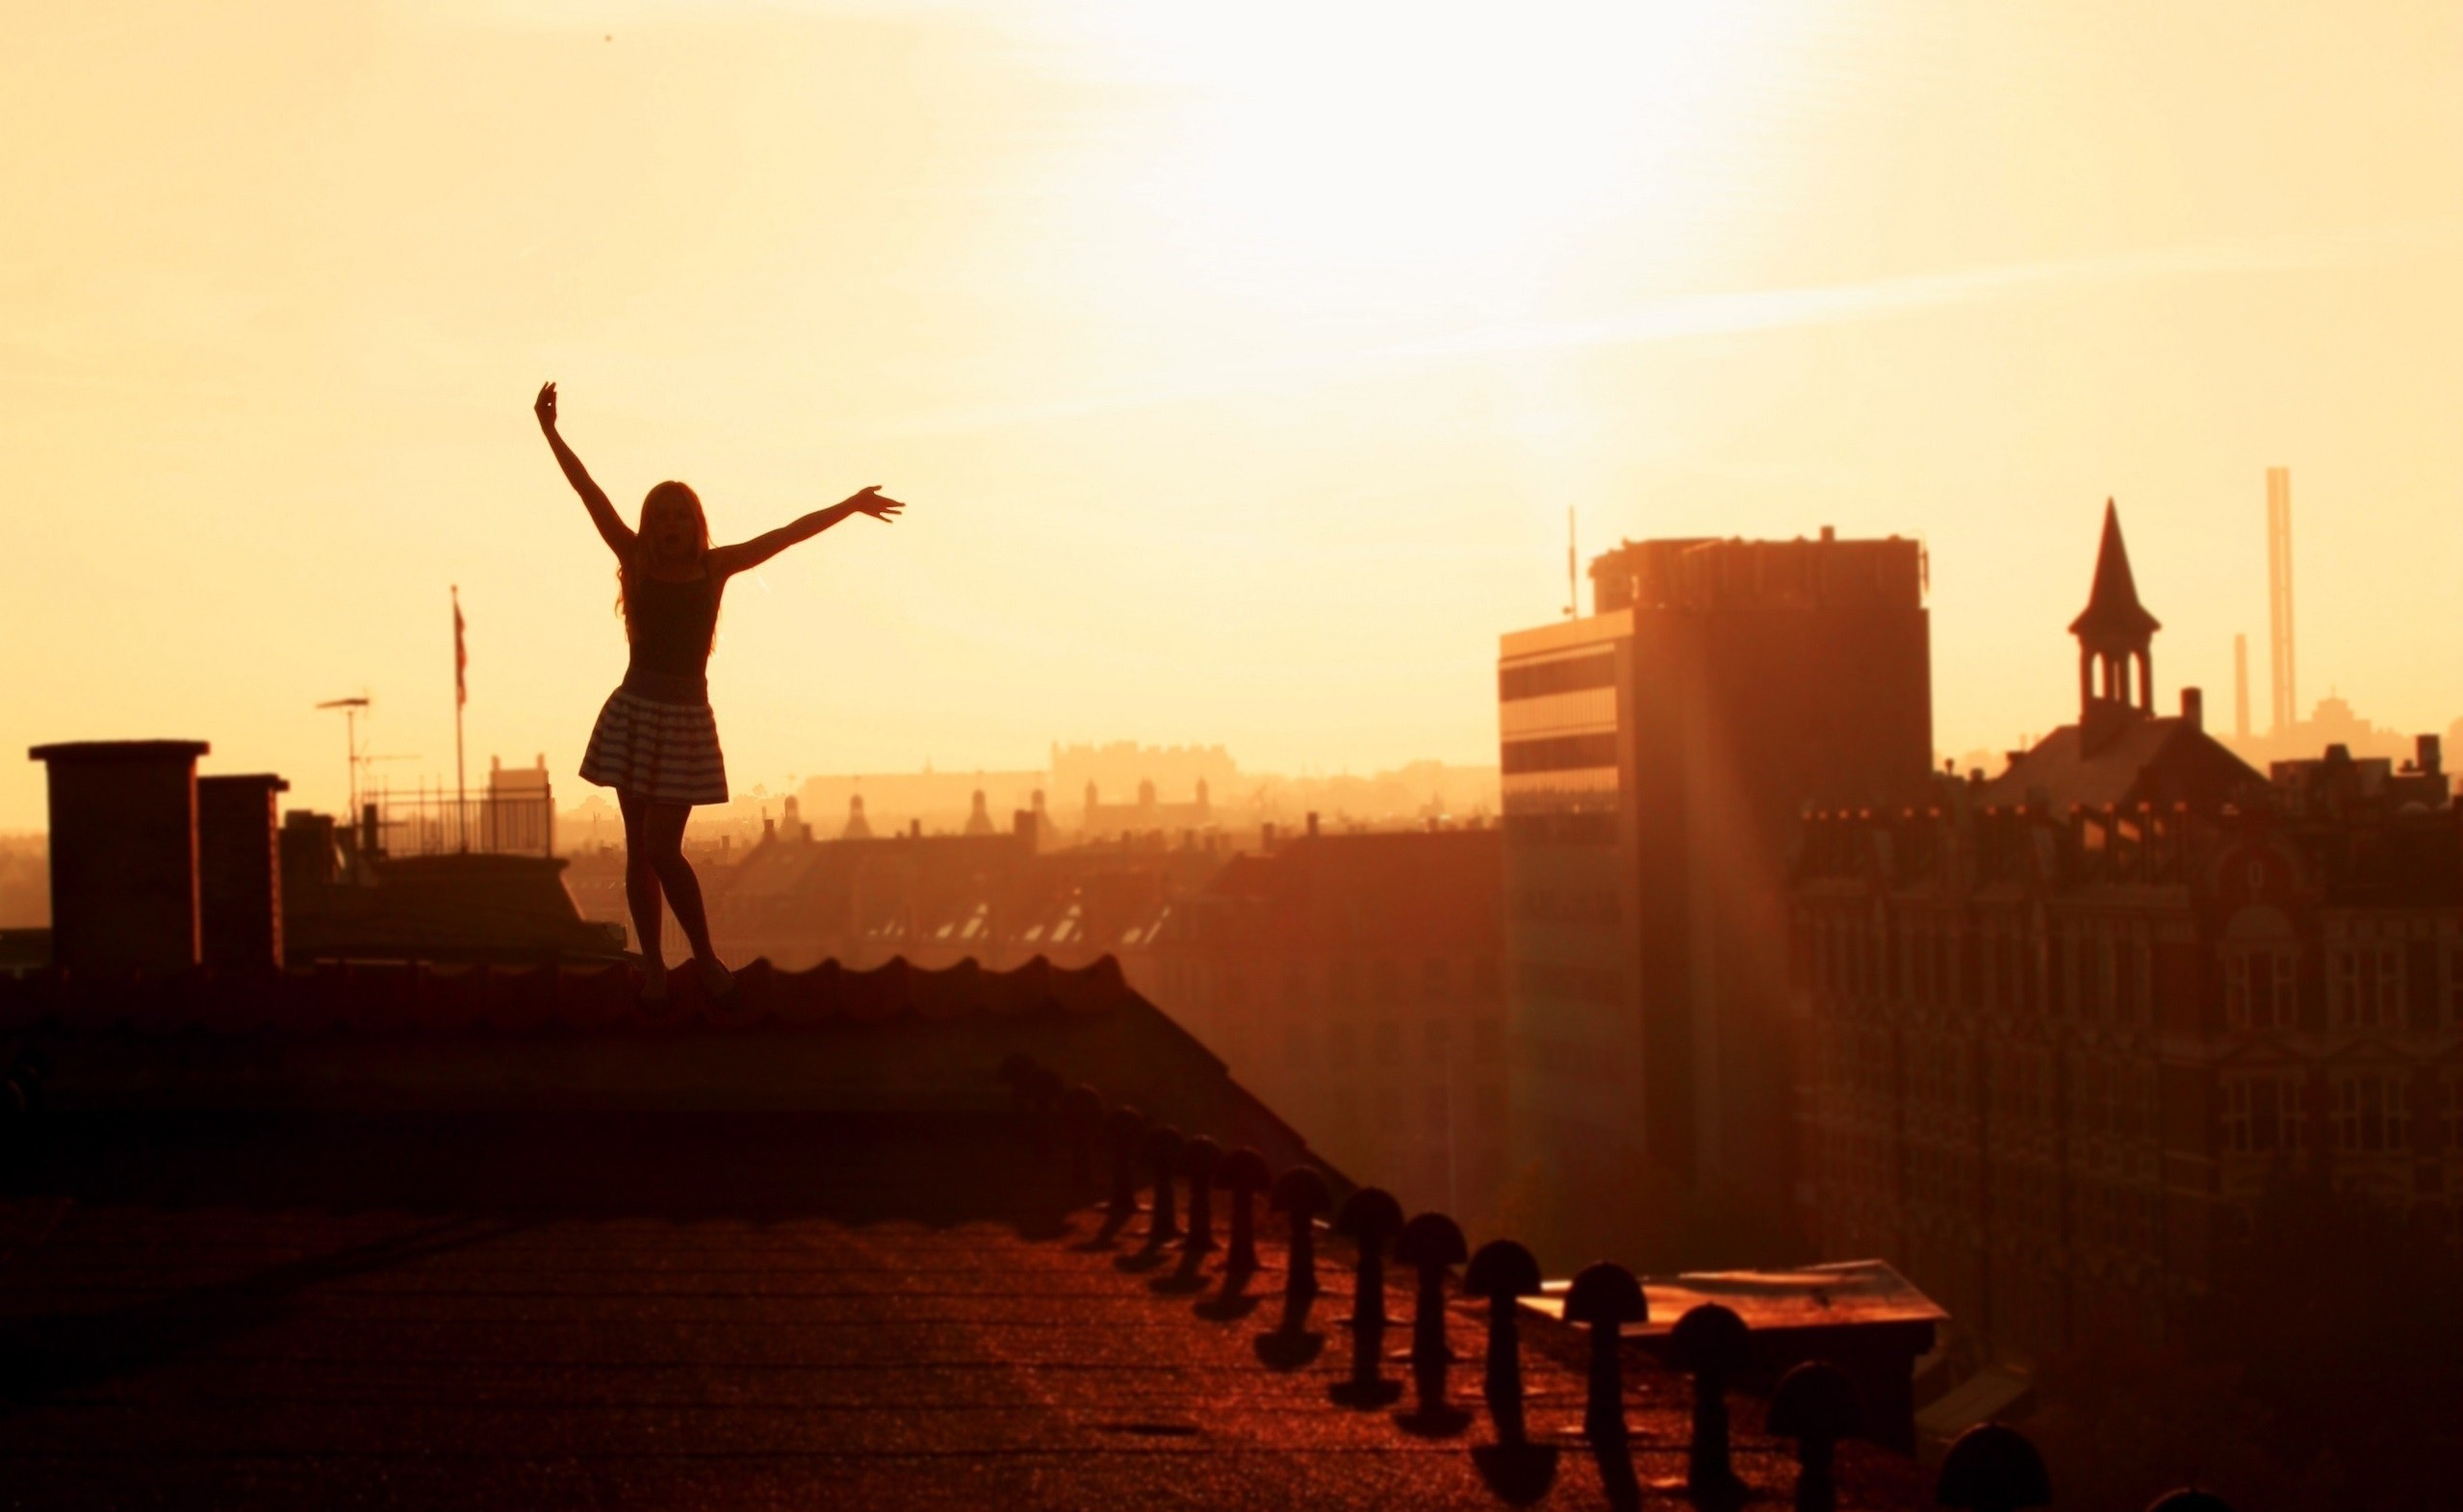 women, Arms up, Photography, Cityscape, Urban, City, Building, Sunlight, Rooftops, Silhouette Wallpaper